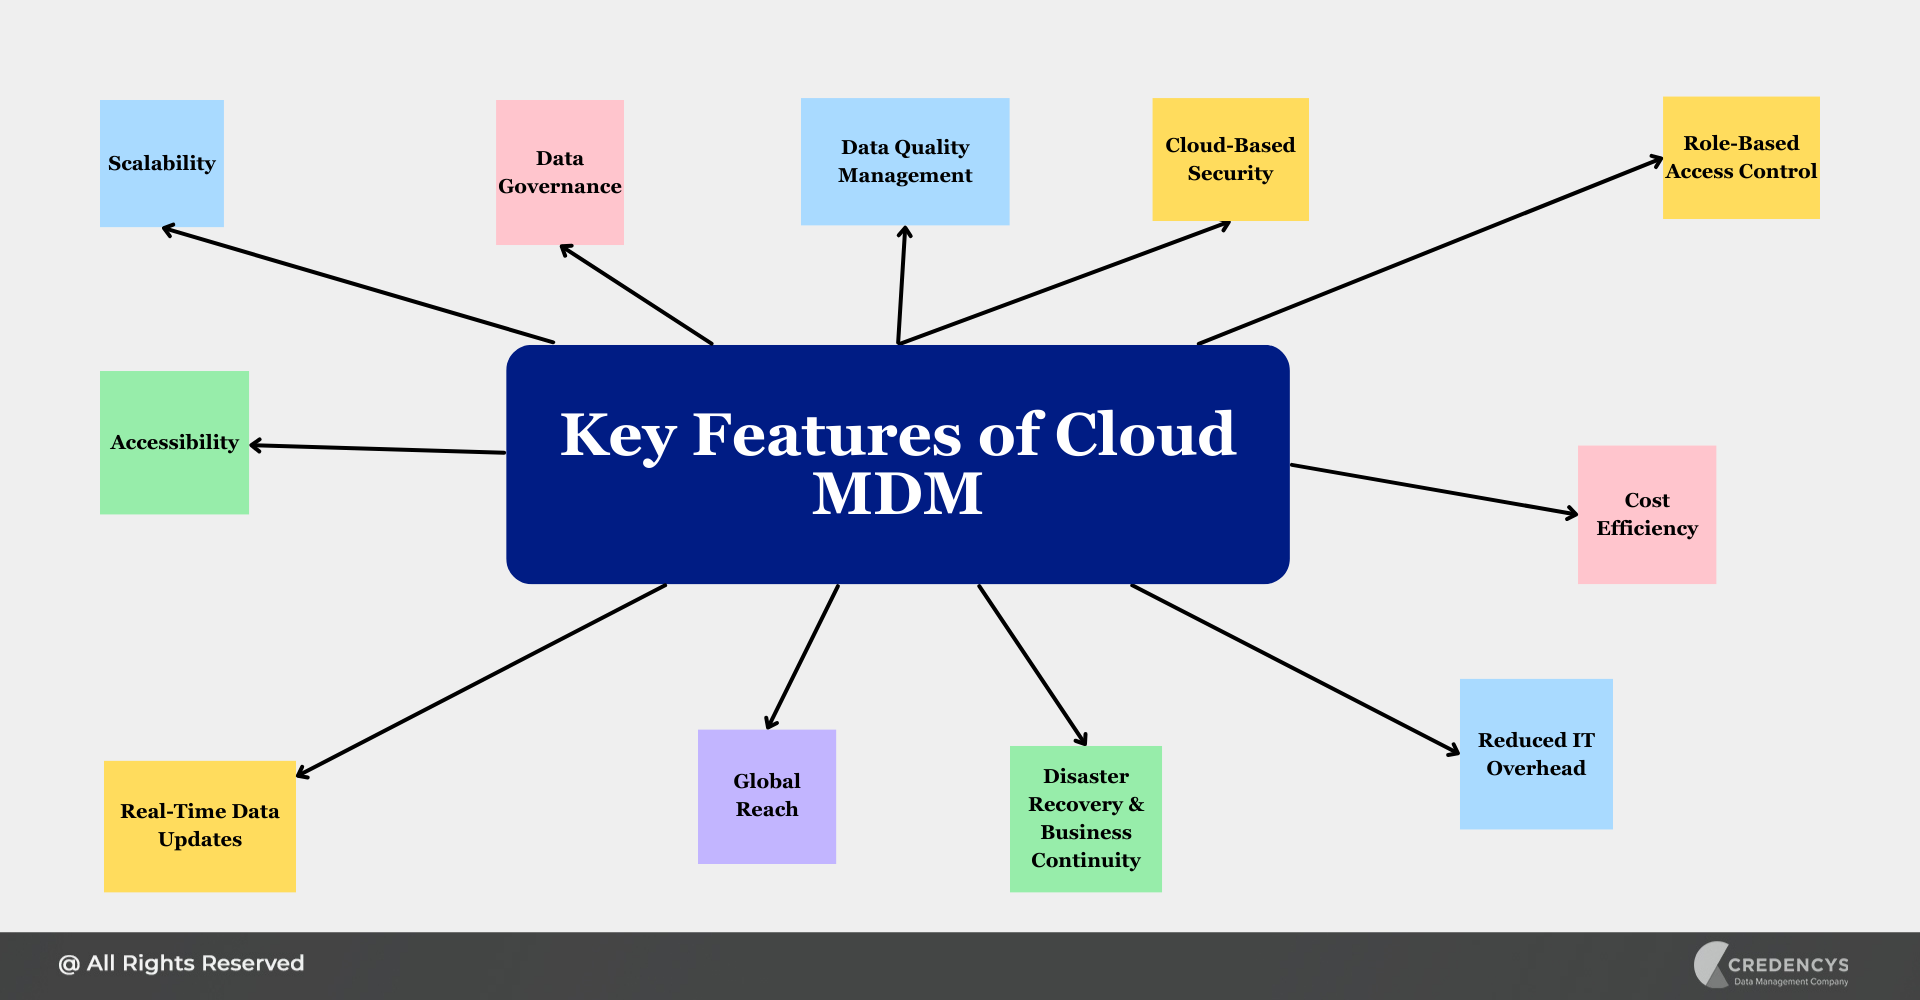 Key Features of Cloud MDM